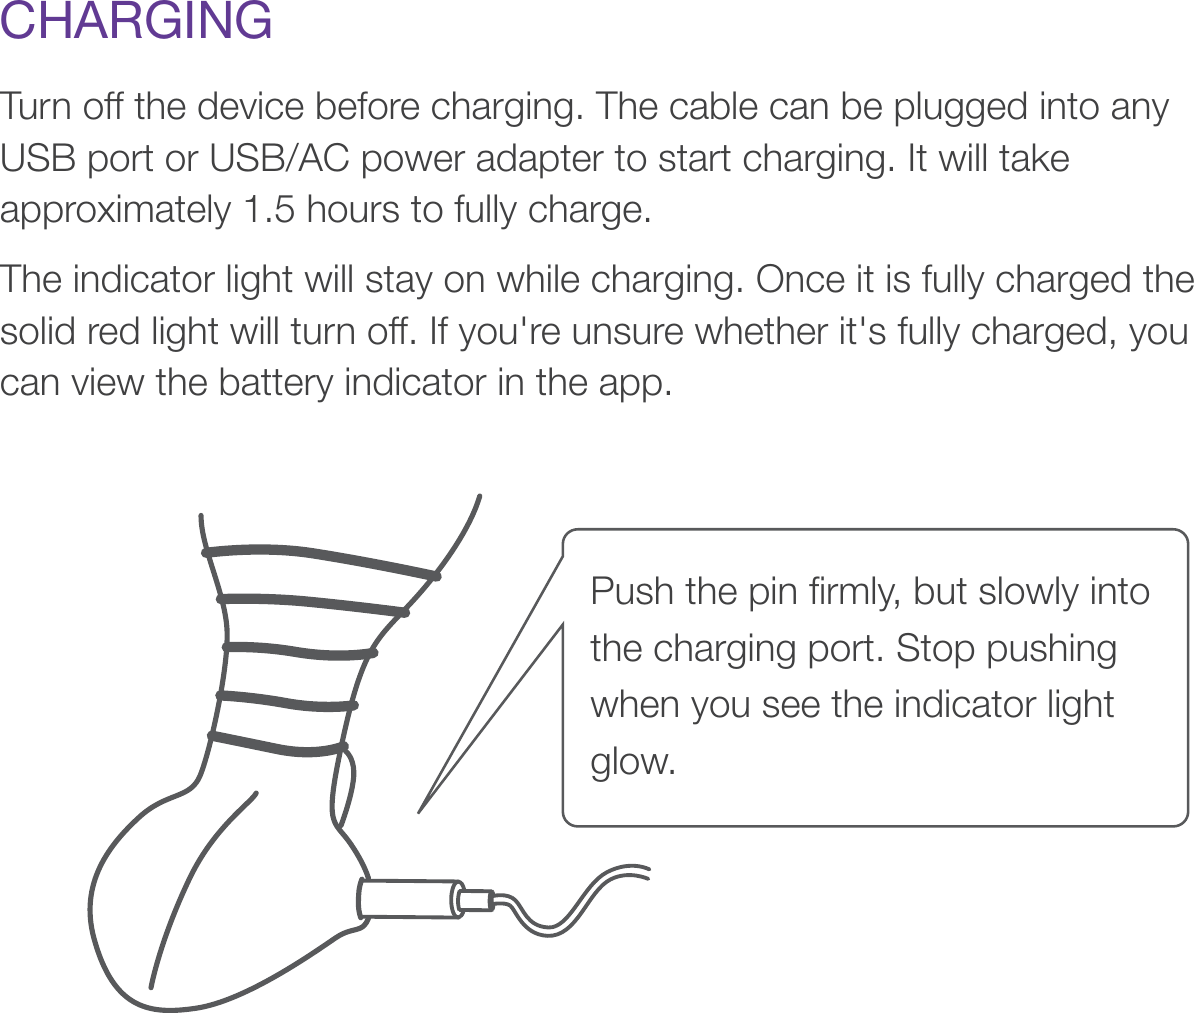 CHARGINGTurn off the device before charging. The cable can be plugged into any USB port or USB/AC power adapter to start charging. It will take approximately 1.5 hours to fully charge. The indicator light will stay on while charging. Once it is fully charged the solid red light will turn off. If you&apos;re unsure whether it&apos;s fully charged, you can view the battery indicator in the app.Push the pin ﬁrmly, but slowly into the charging port. Stop pushing when you see the indicator light glow. 